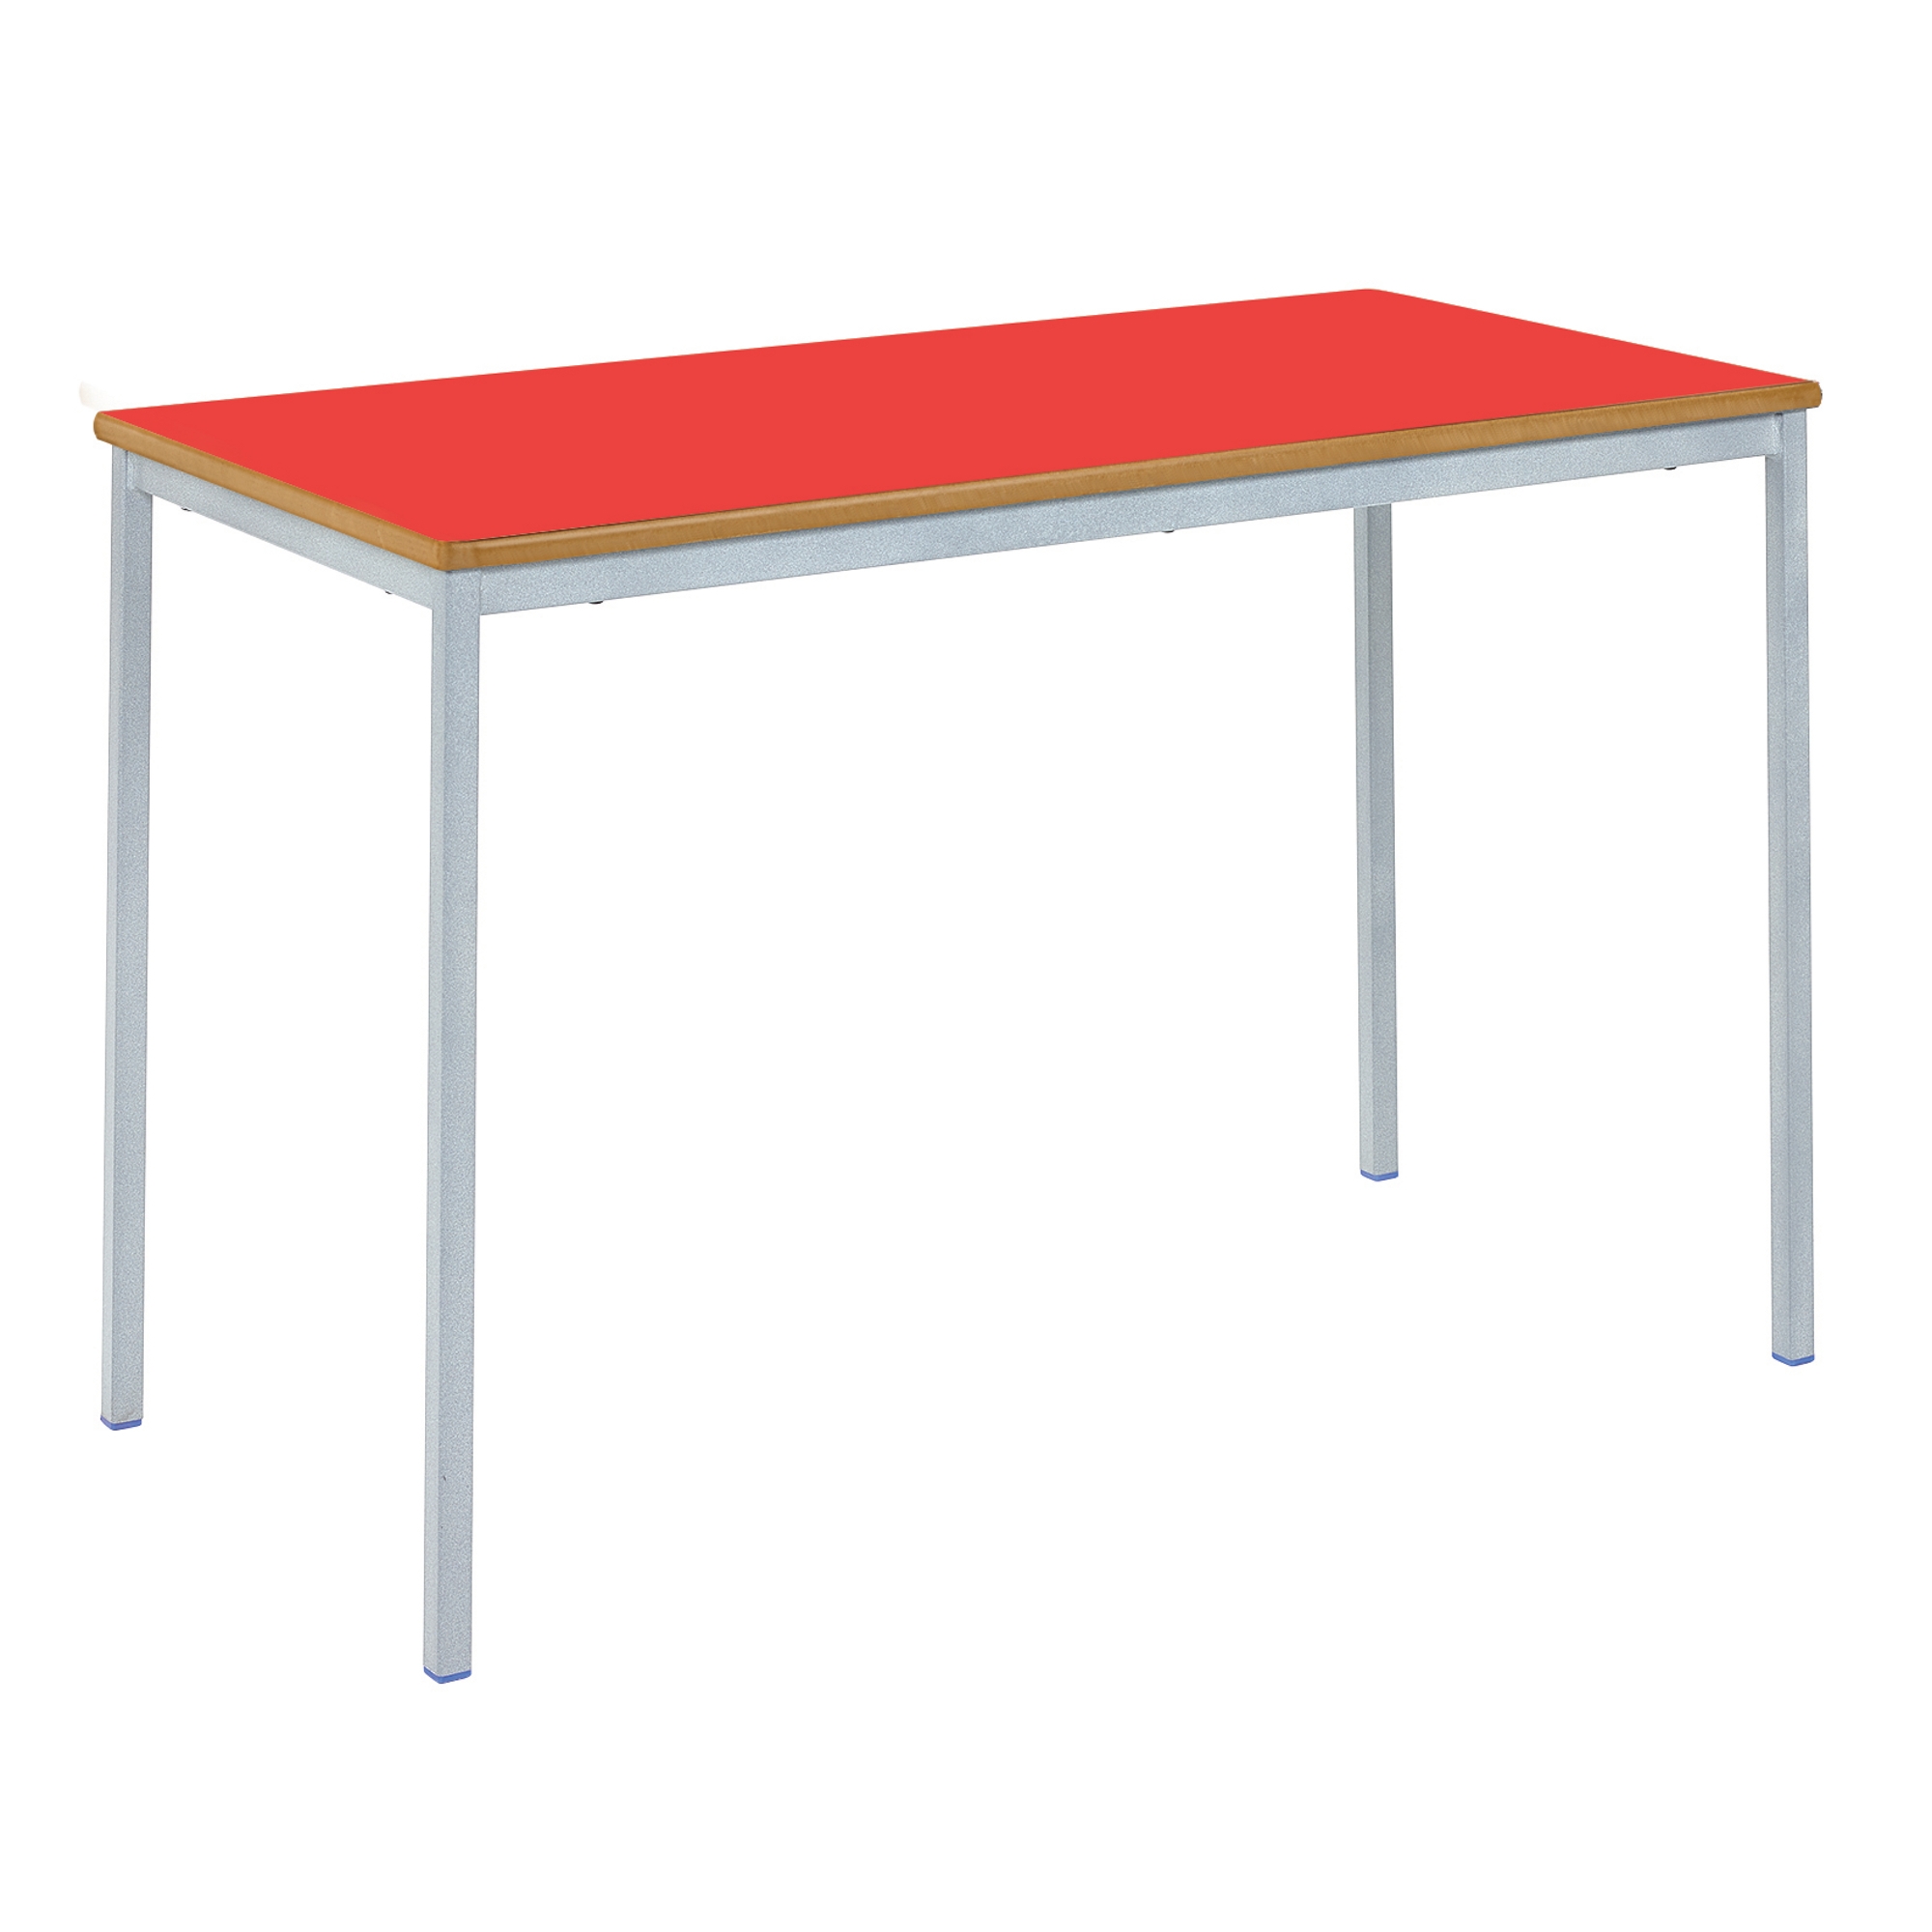 Classmates Rectangular Fully Welded Classroom Table - 1100 x 550 x 590mm - Red